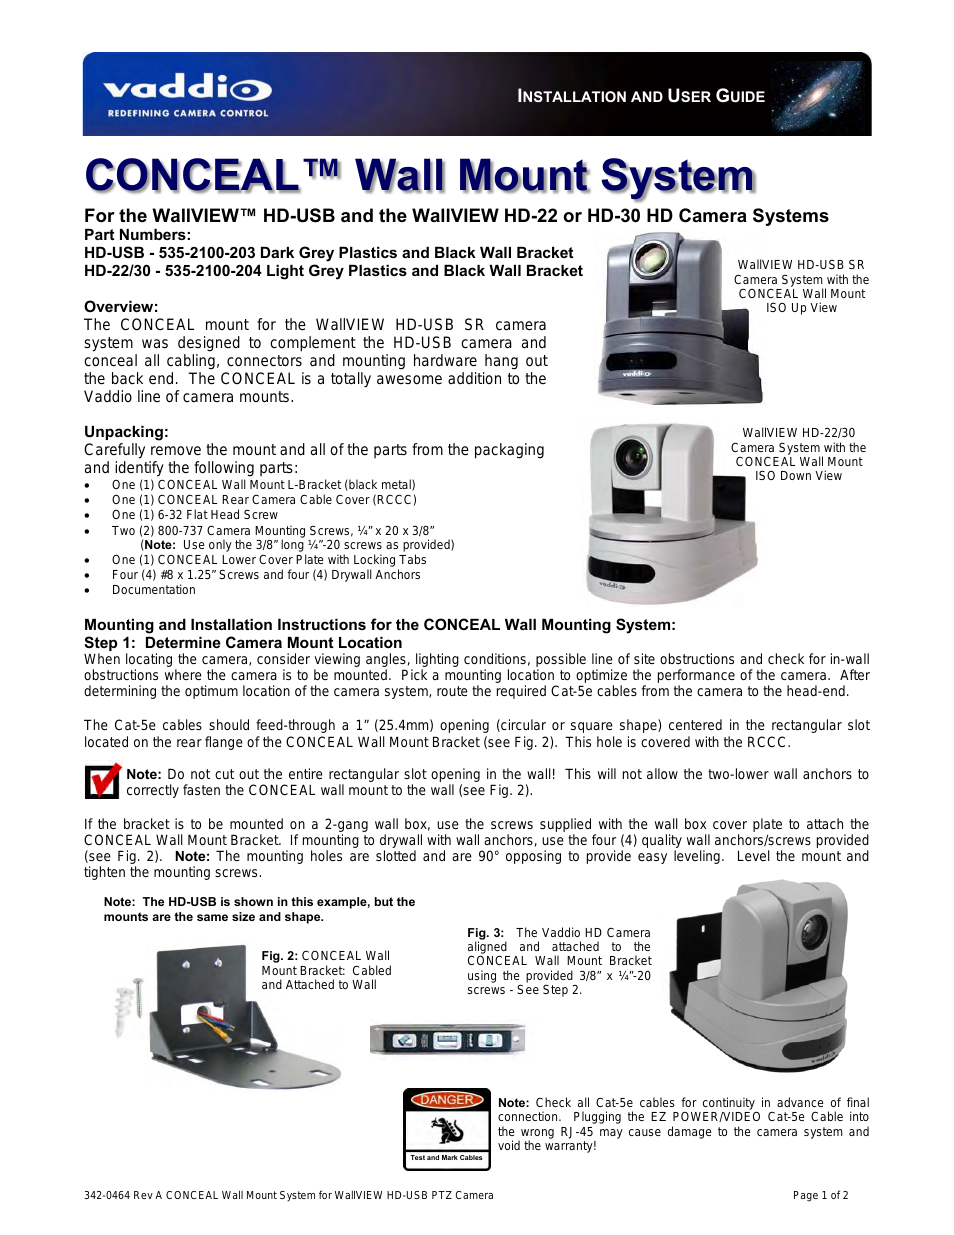 CONCEAL Wall Mounting System for WallVIEW HD-USB SR